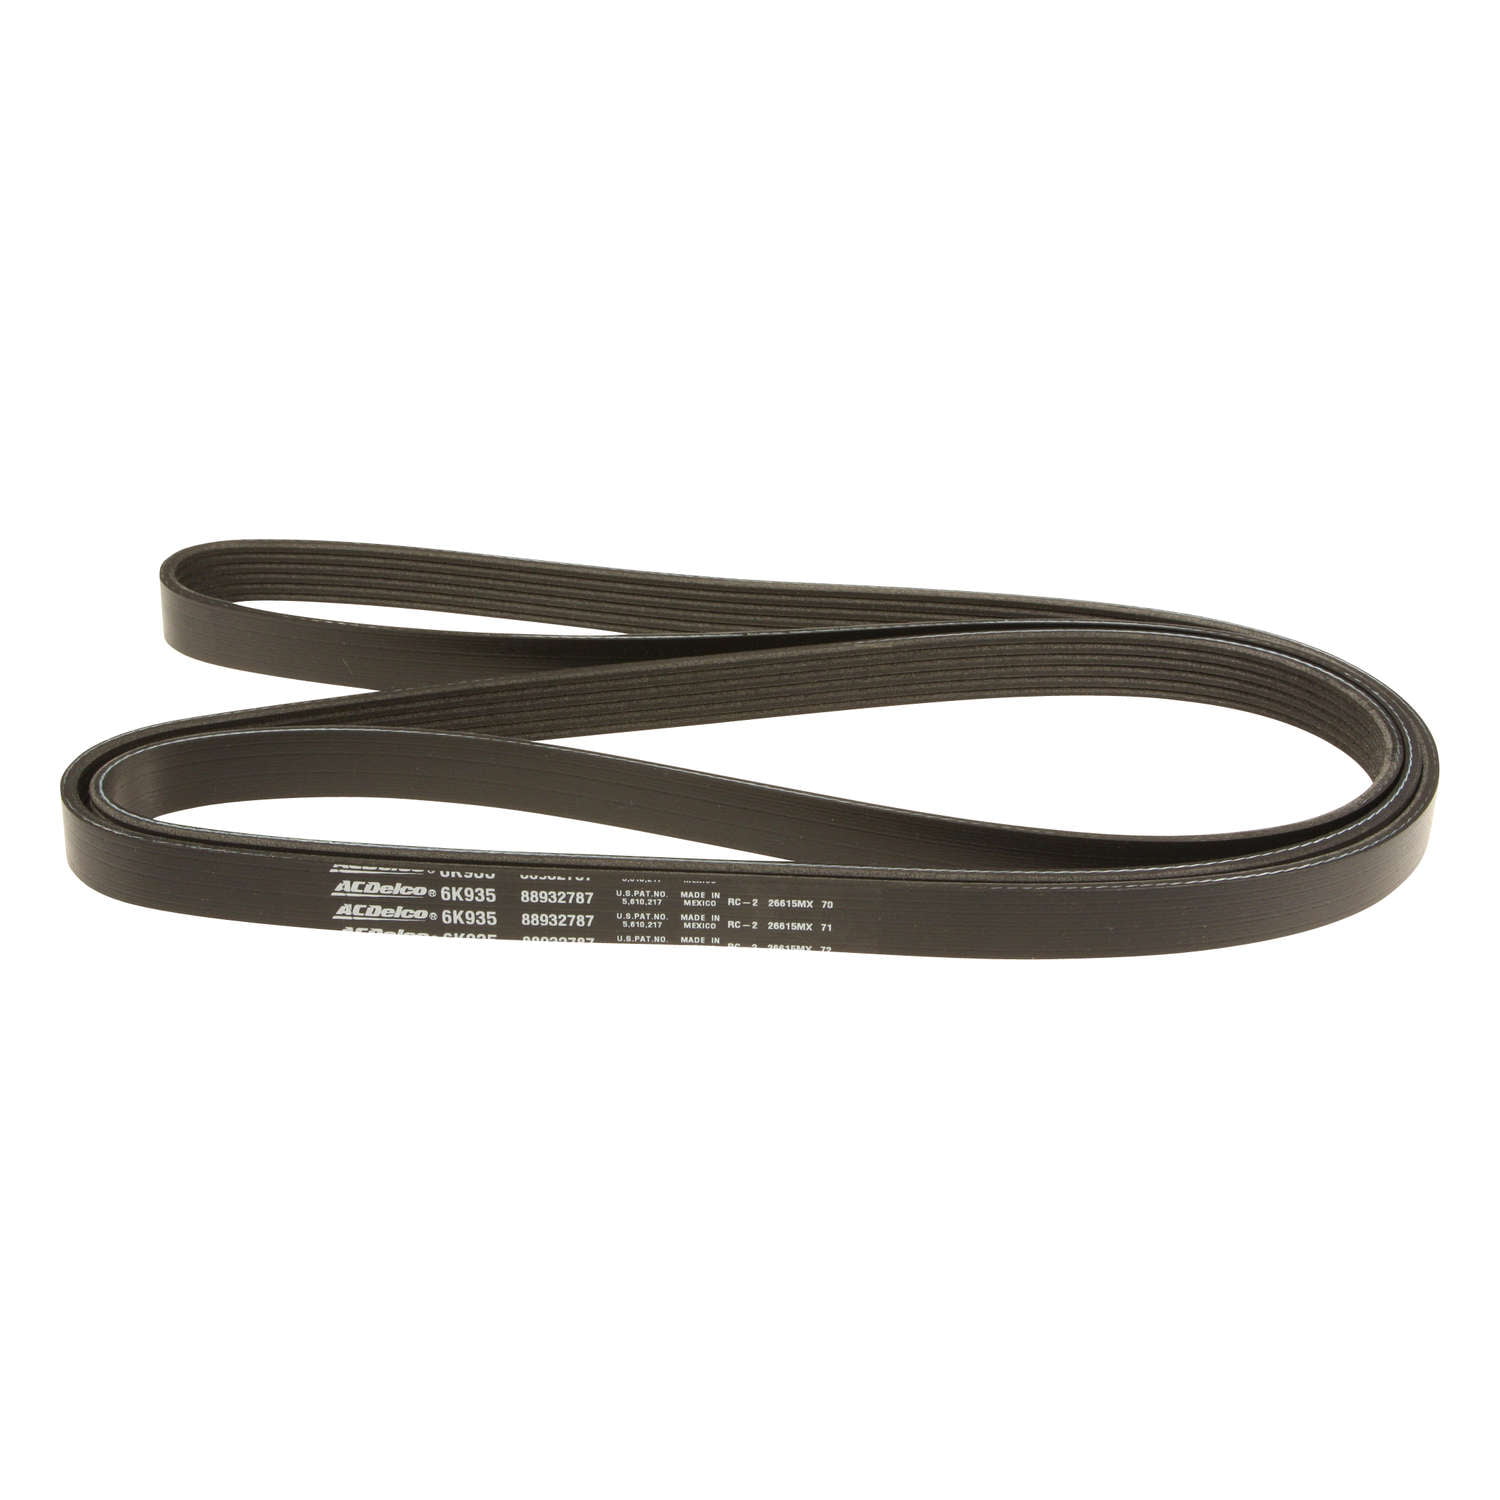 6K935 AC Delco Serpentine Belt New for Chevy Mercedes Olds Express Van Suburban